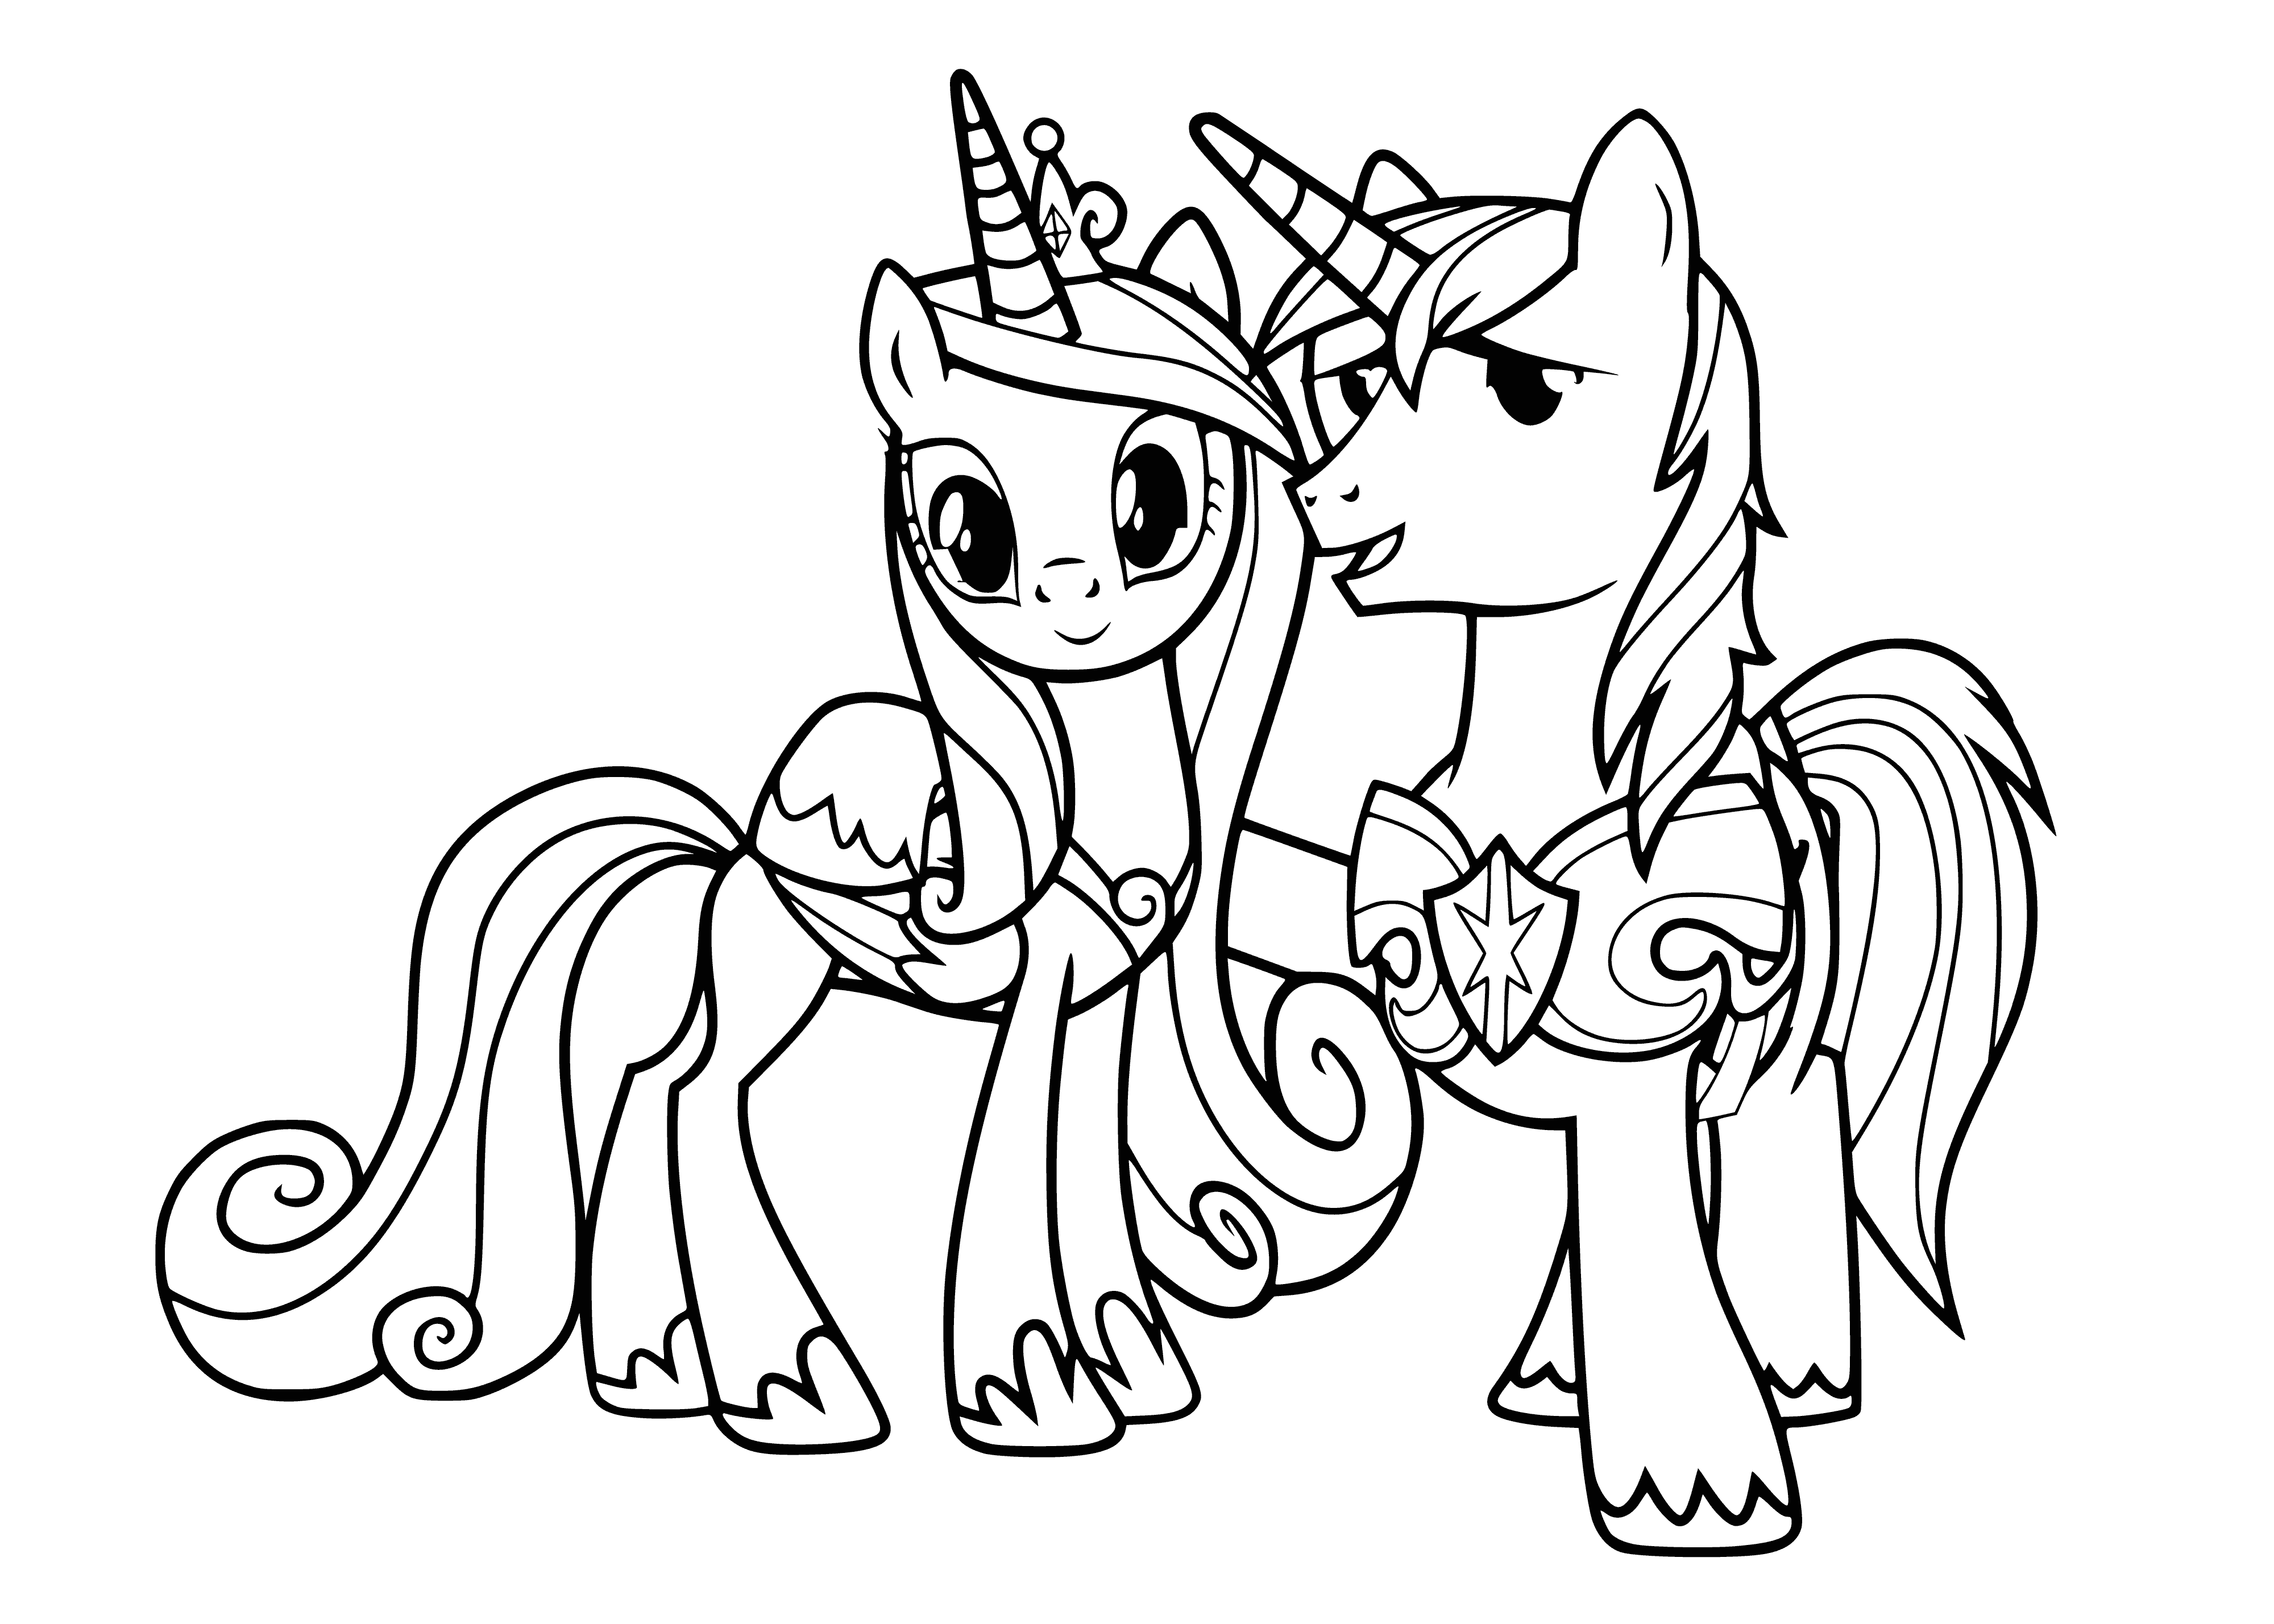 coloring page: Princess Cadance and her husband Shining Armor stand together in regal attire. She has a pink crown and curly locks, he with blue mane and silver armor. They both look happy and kind.